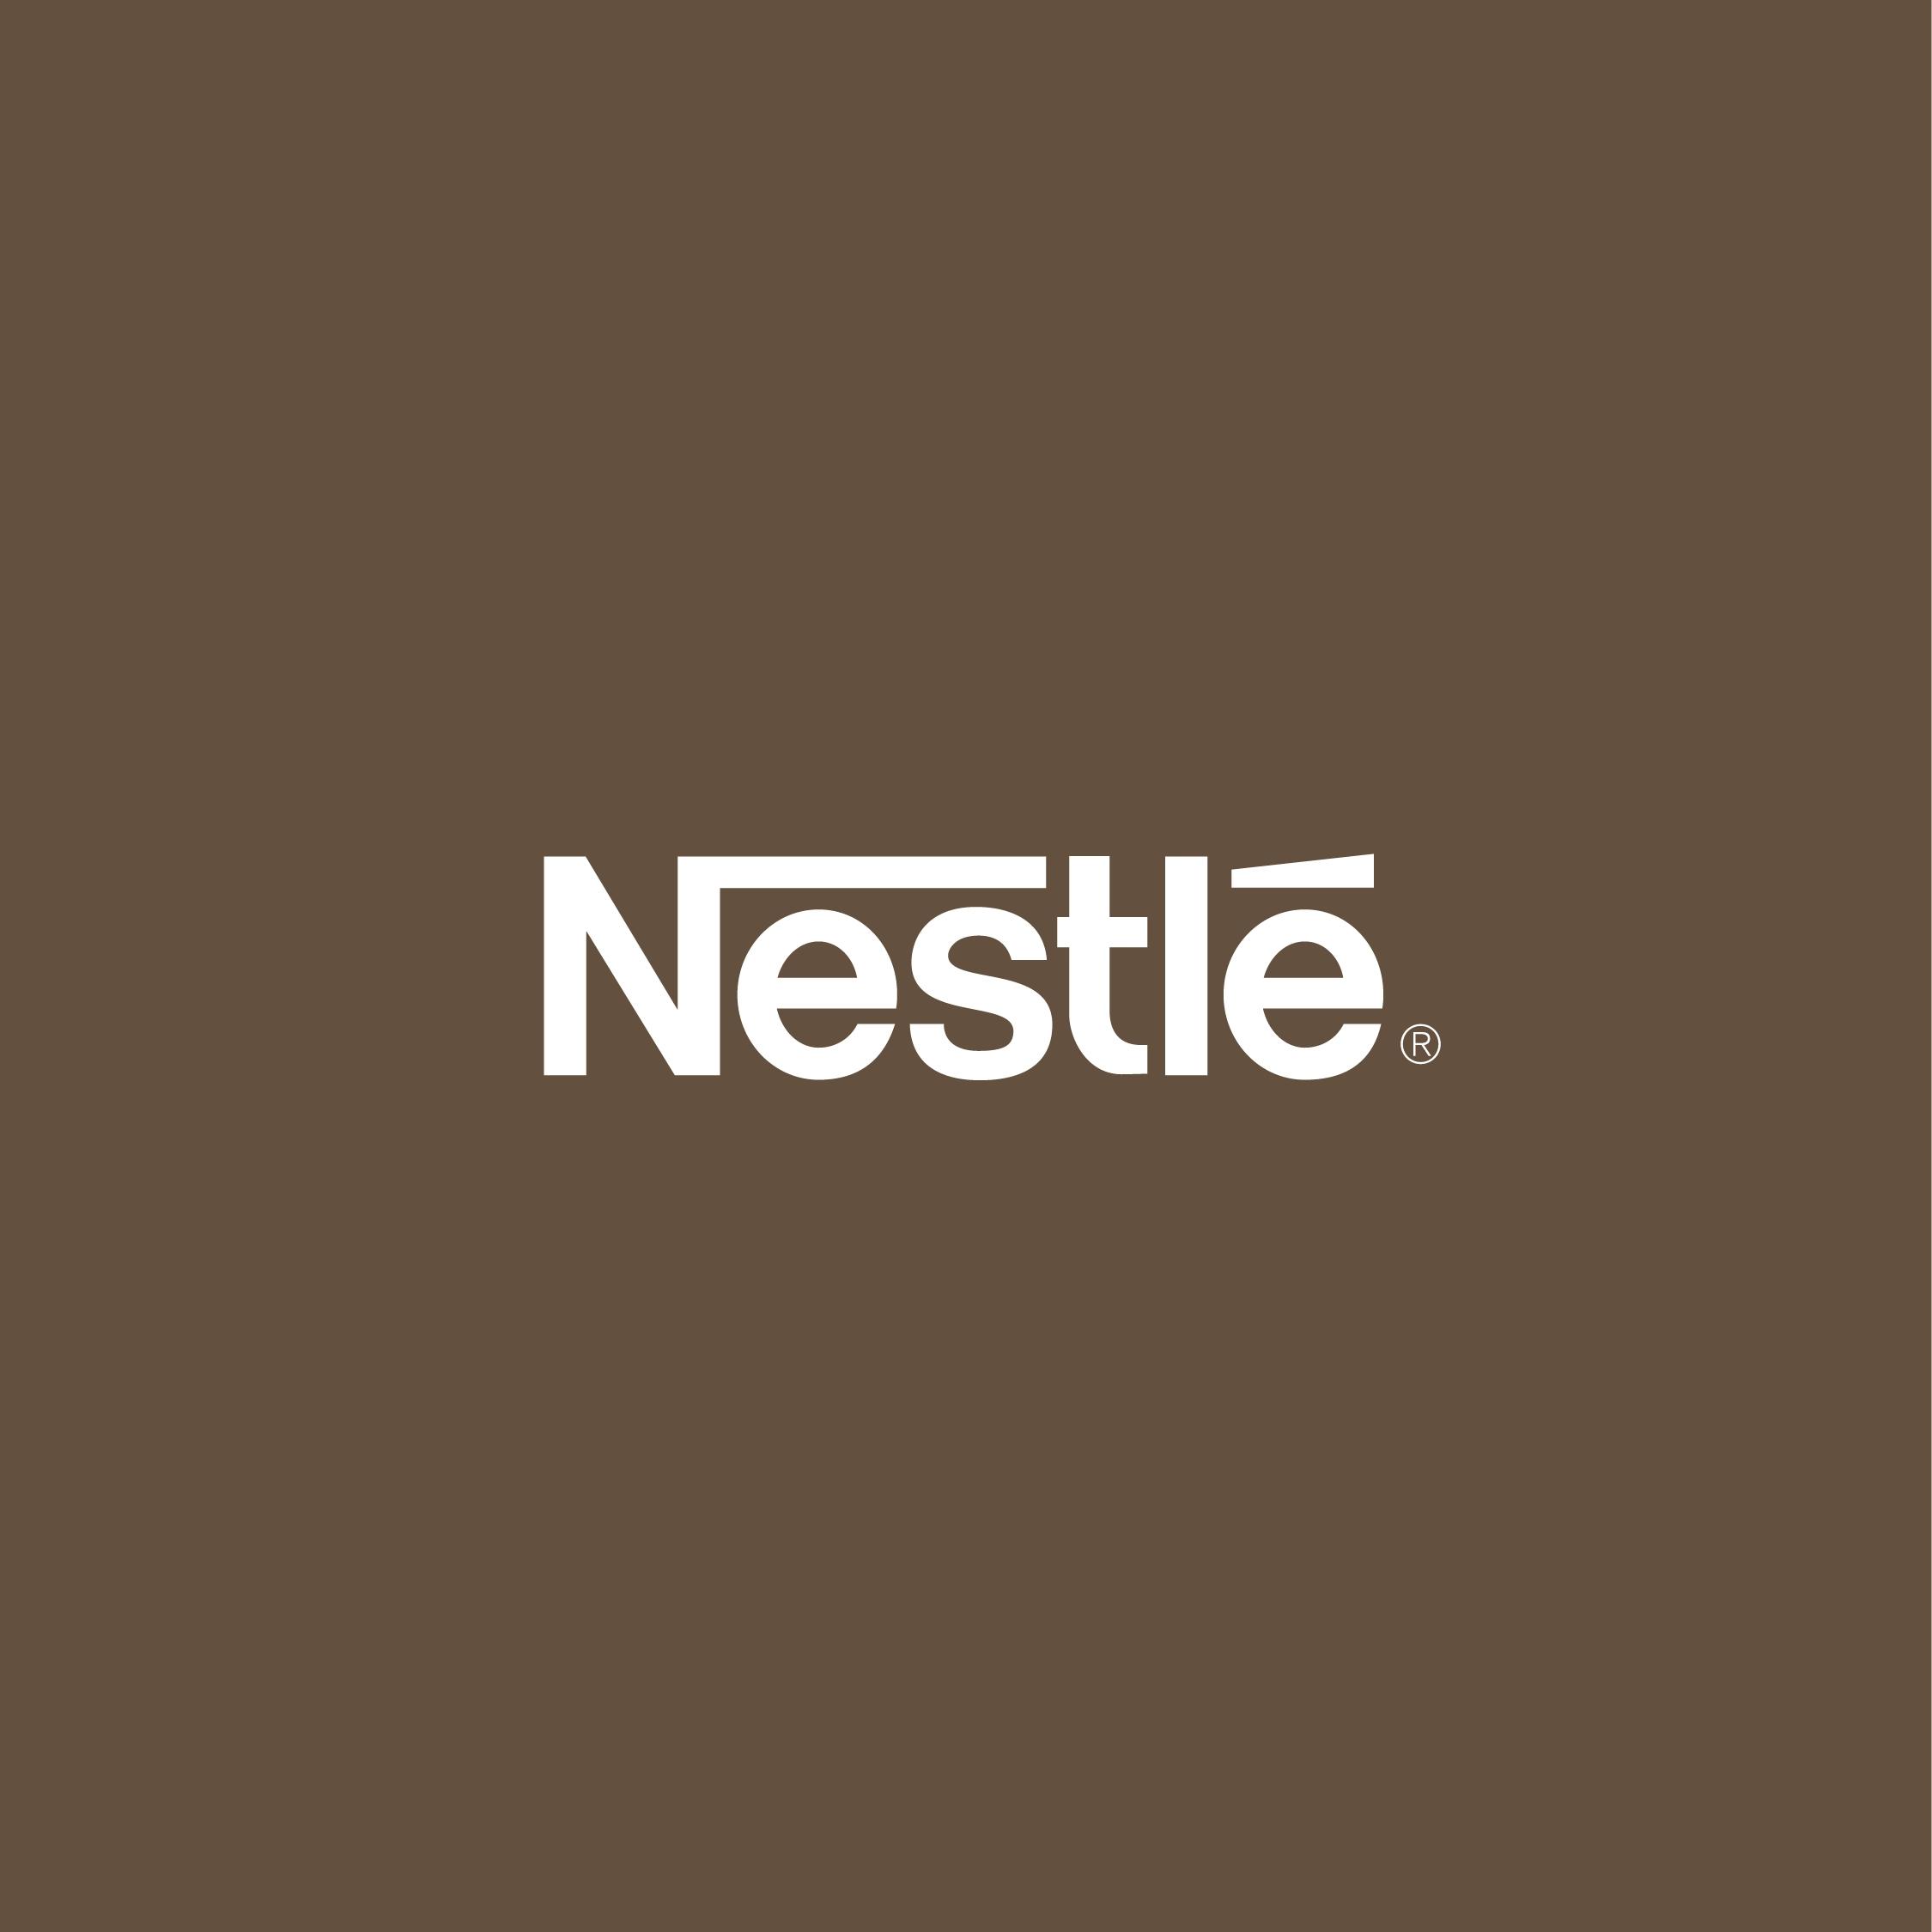 Mastering global brand building with Nestlé